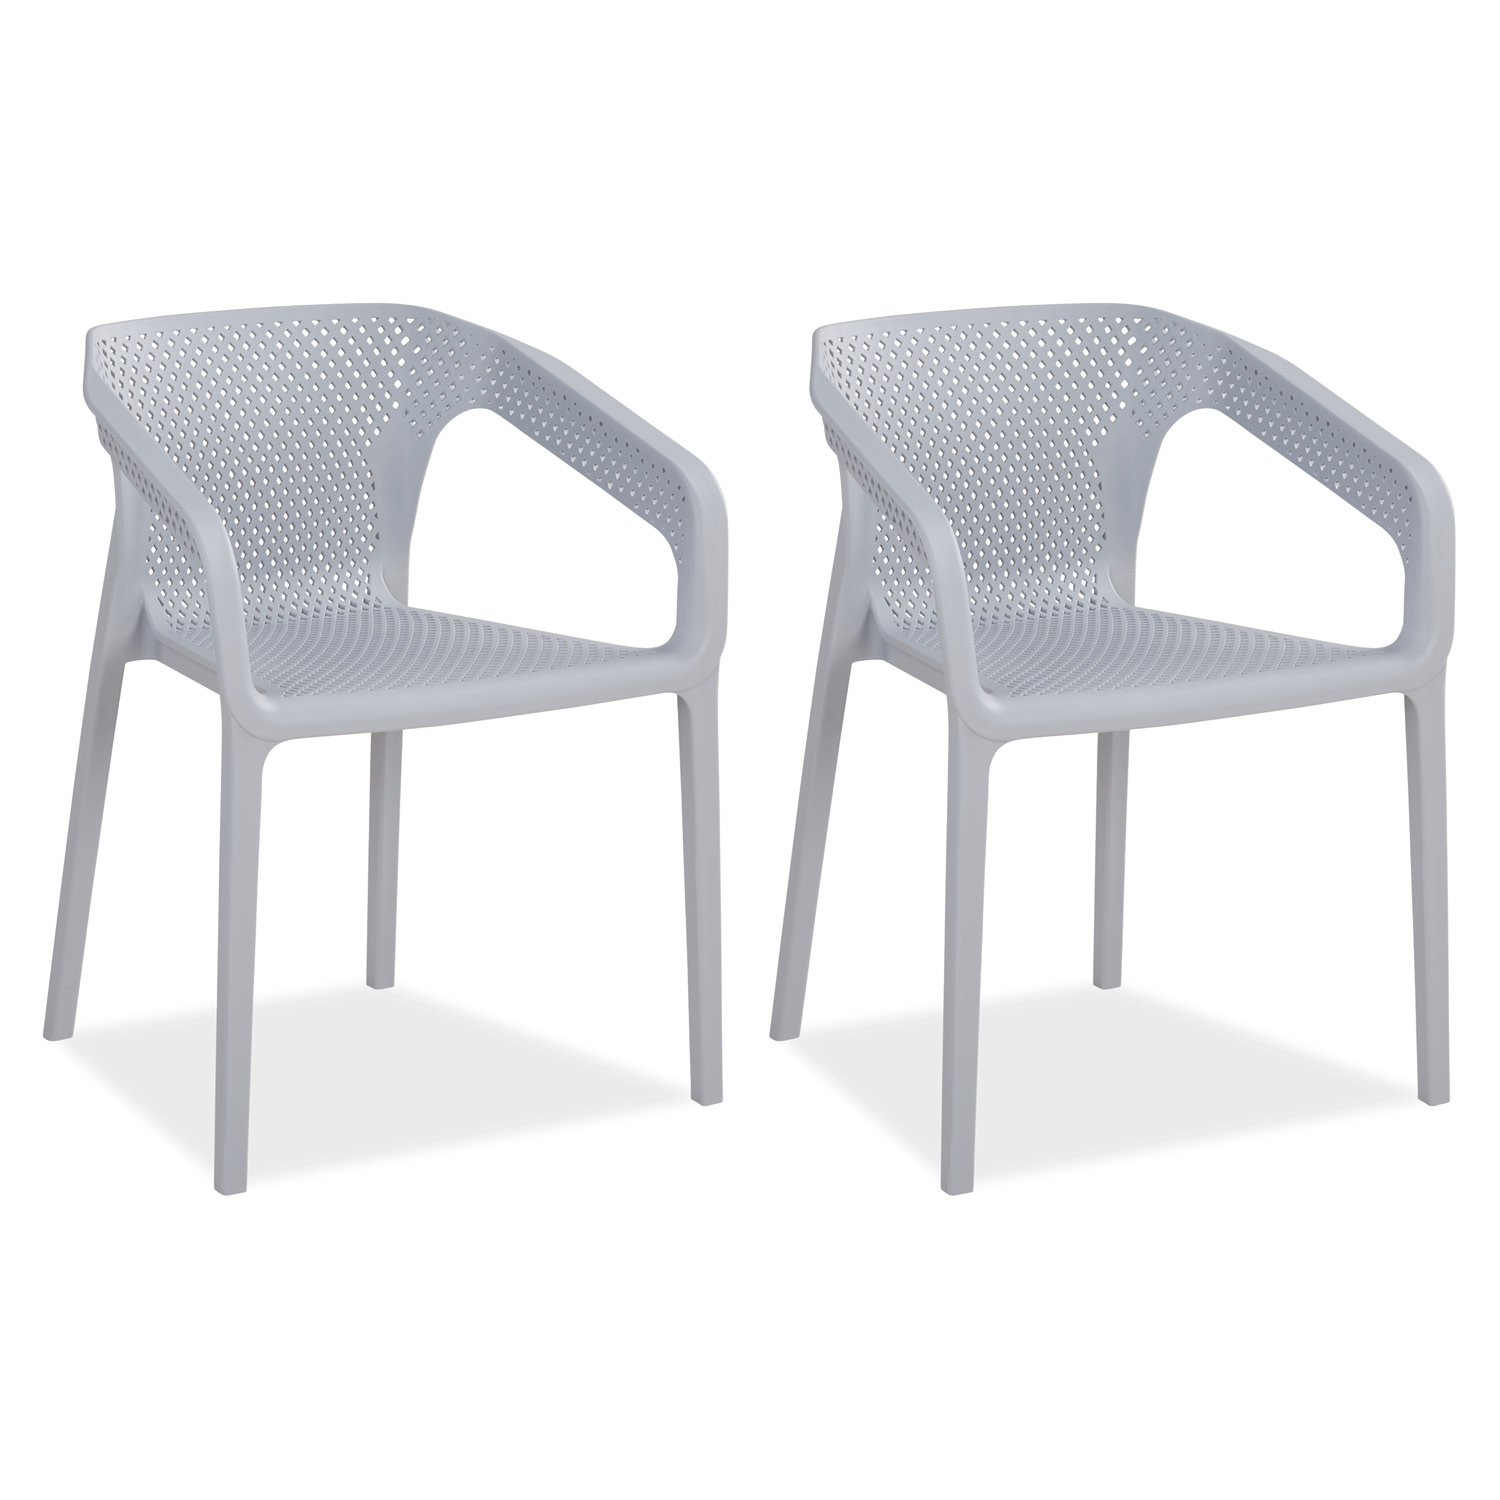 Set of 2 Garden chair with armrests Camping chairs Grey Outdoor chairs Plastic Egg chair Lounger chairs Stacking chairs